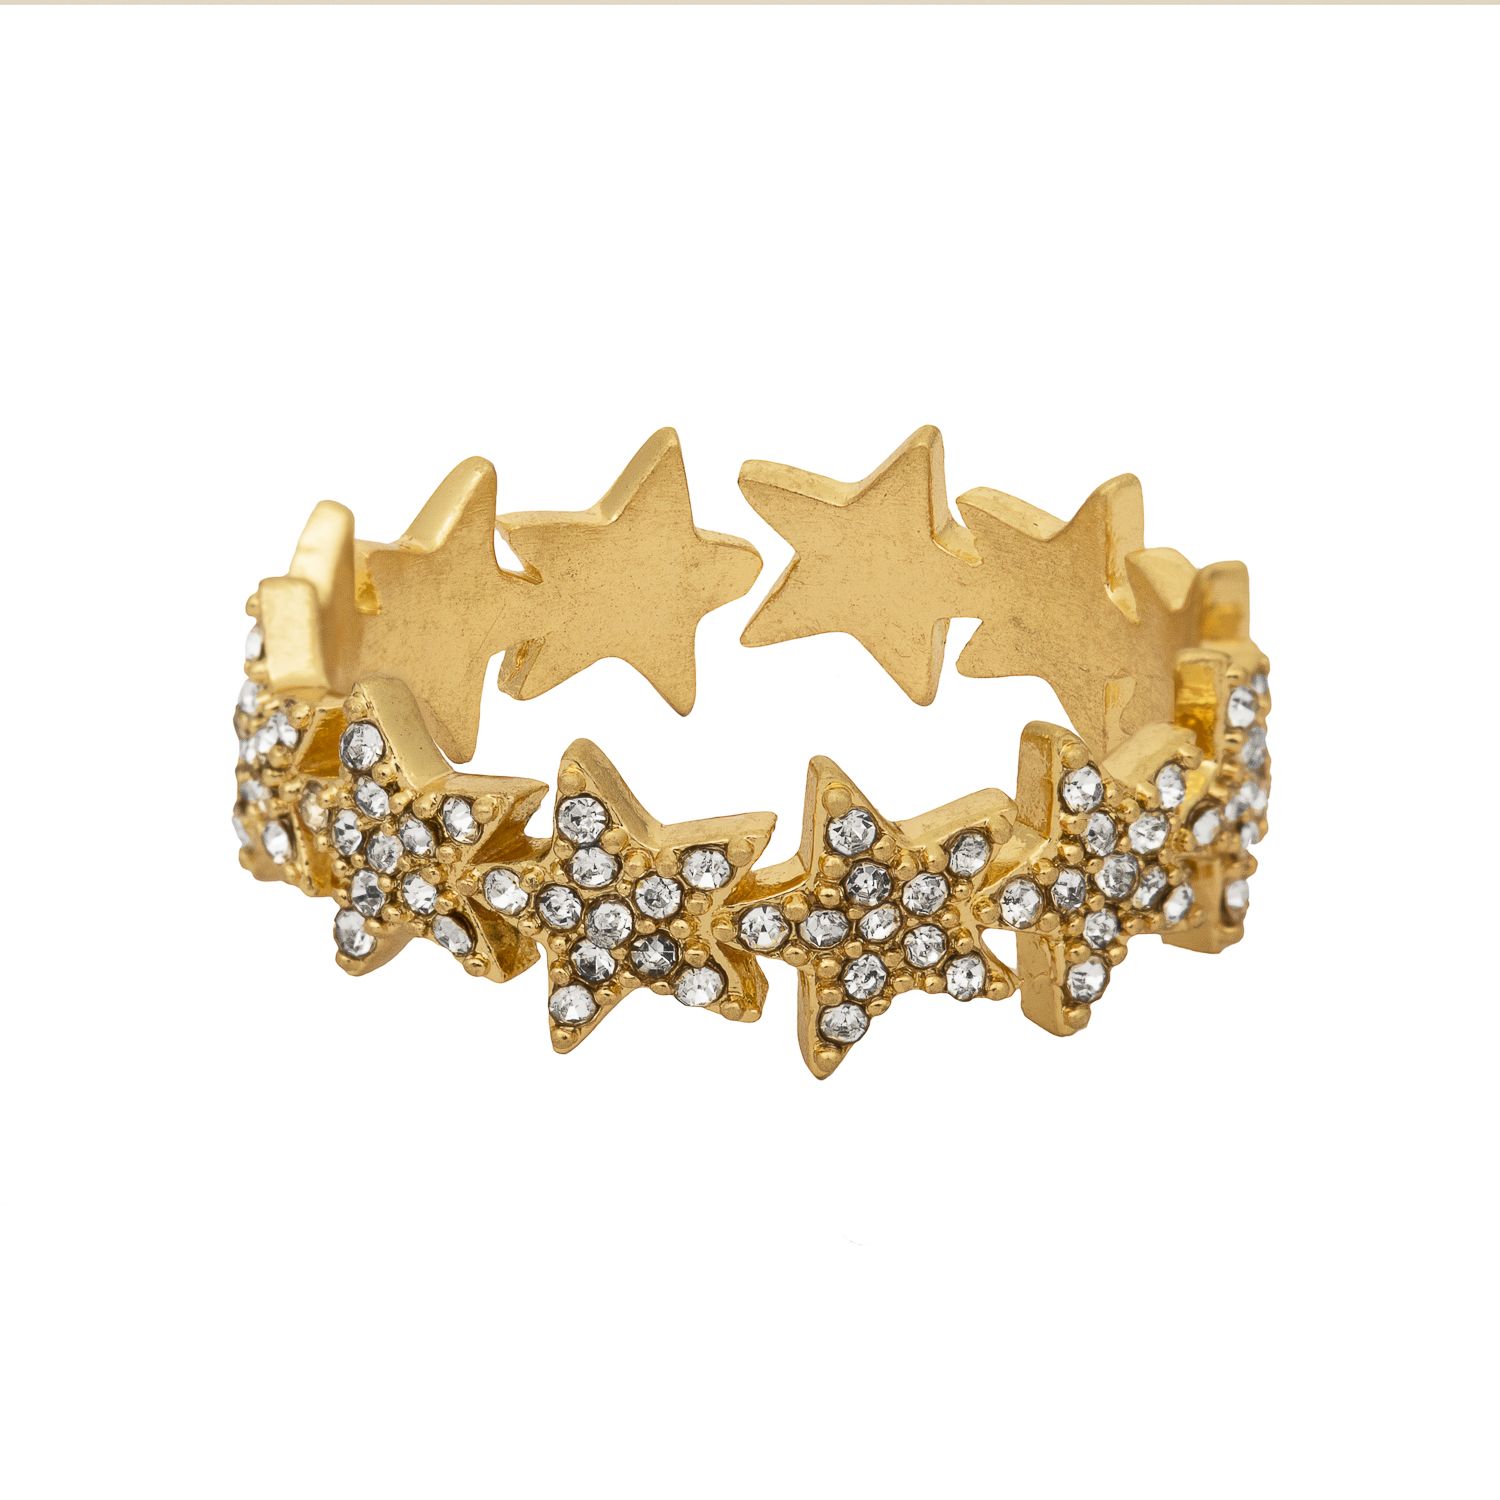 Our gold plated Kate Thornton sparkling star ring will add glamour and sparkle to your style whether for a special occasion or just because. This classic piece can be worn with any outfit, from jeans and a t-shirt to your favourite party dress. So whether you want it for a special occasion or just because, our sparkly star ring is sure to do you proud. The gold tone adjustable ring is 18mm in diameter but can be gently adjusted to change size.  Presented in a KTx jewellery pouch to keep your jewellery safe or ideal for gifting!